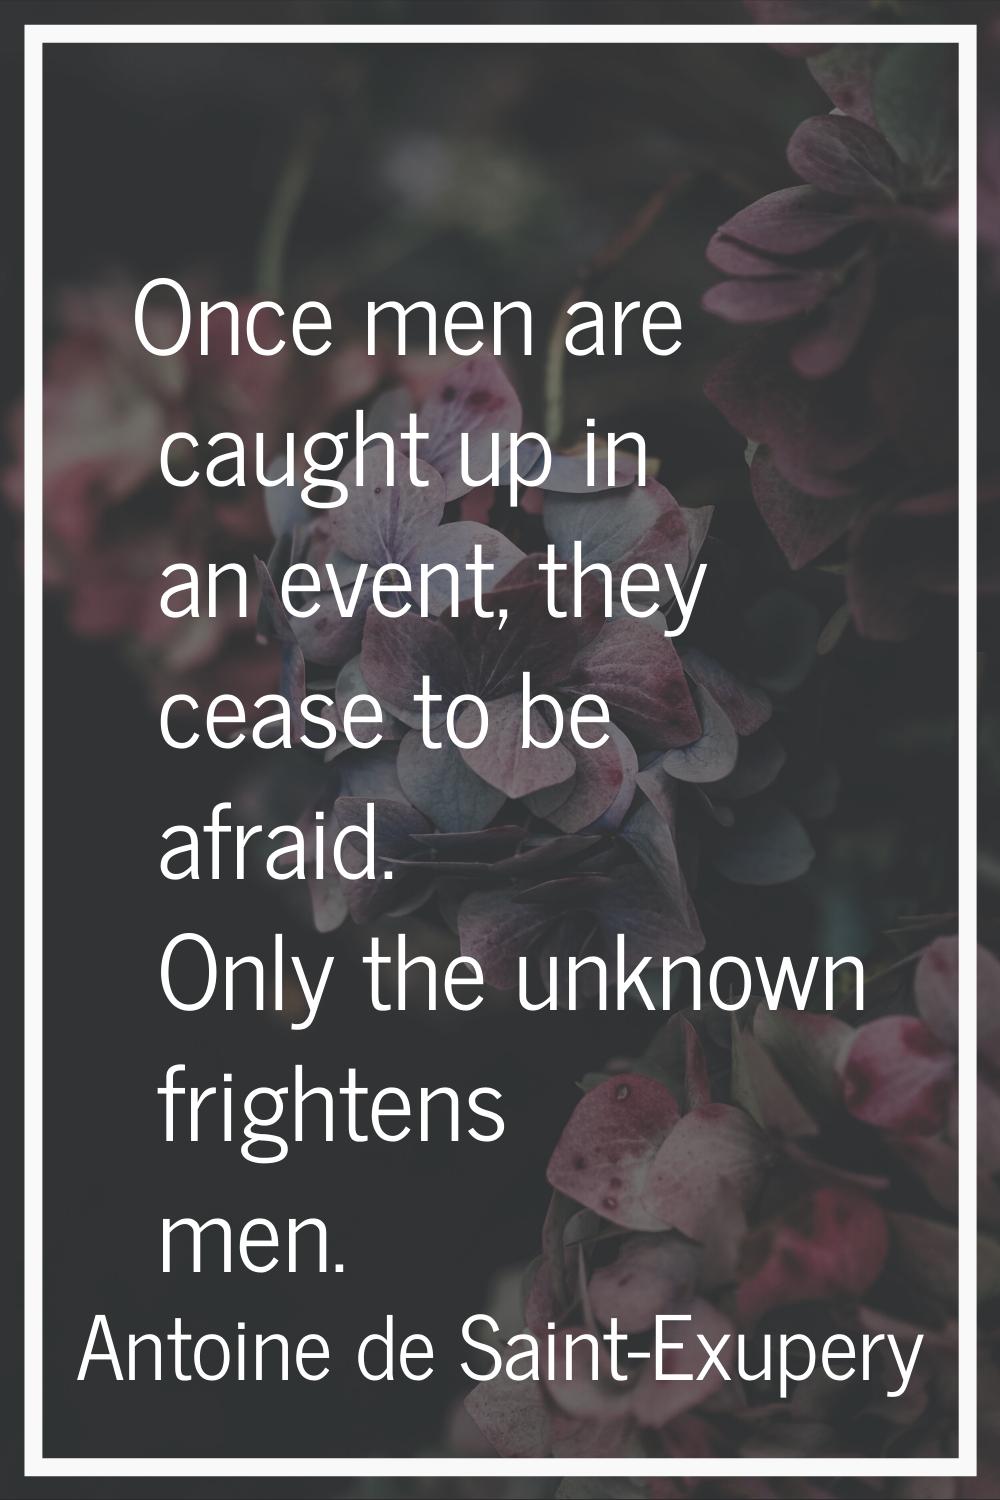 Once men are caught up in an event, they cease to be afraid. Only the unknown frightens men.